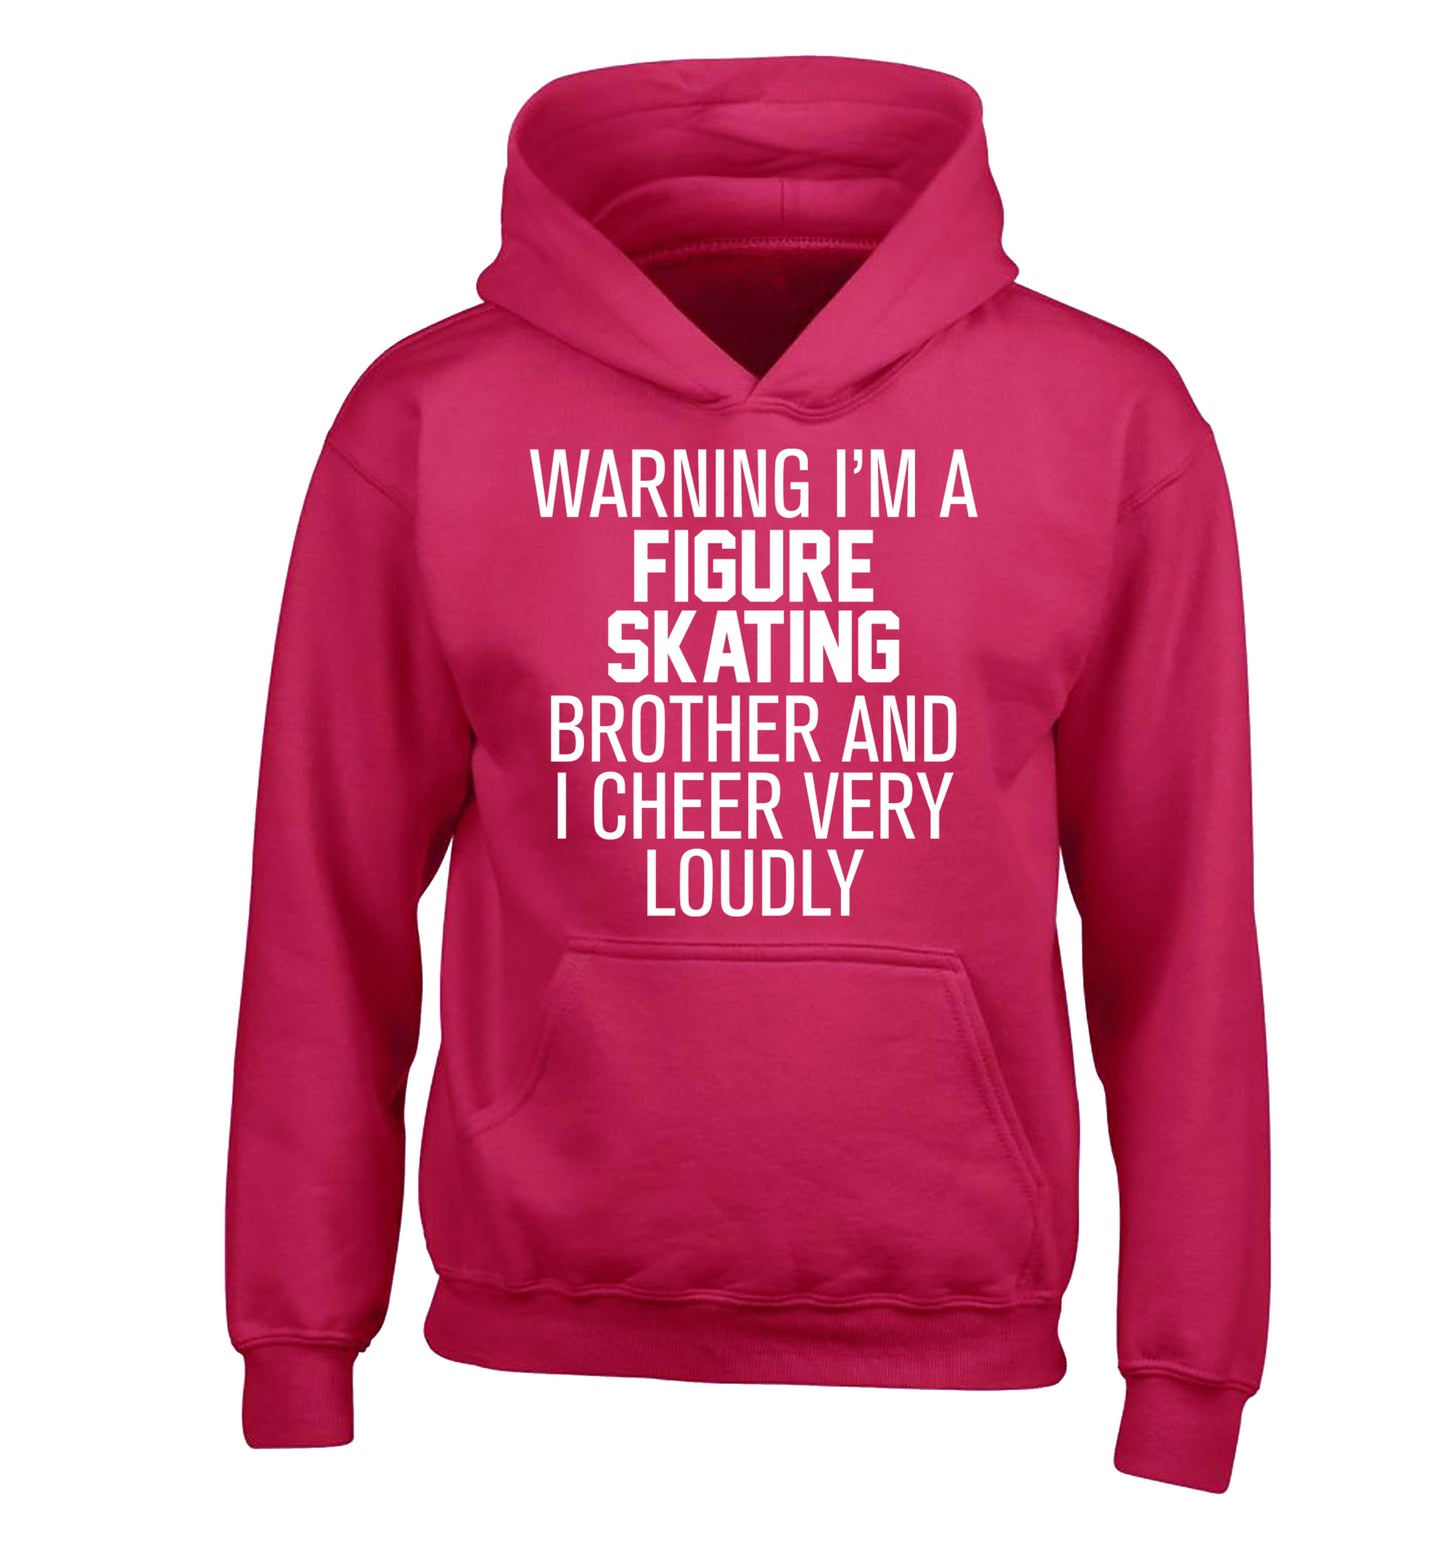 Warning I'm a figure skating brother and I cheer very loudly children's pink hoodie 12-14 Years